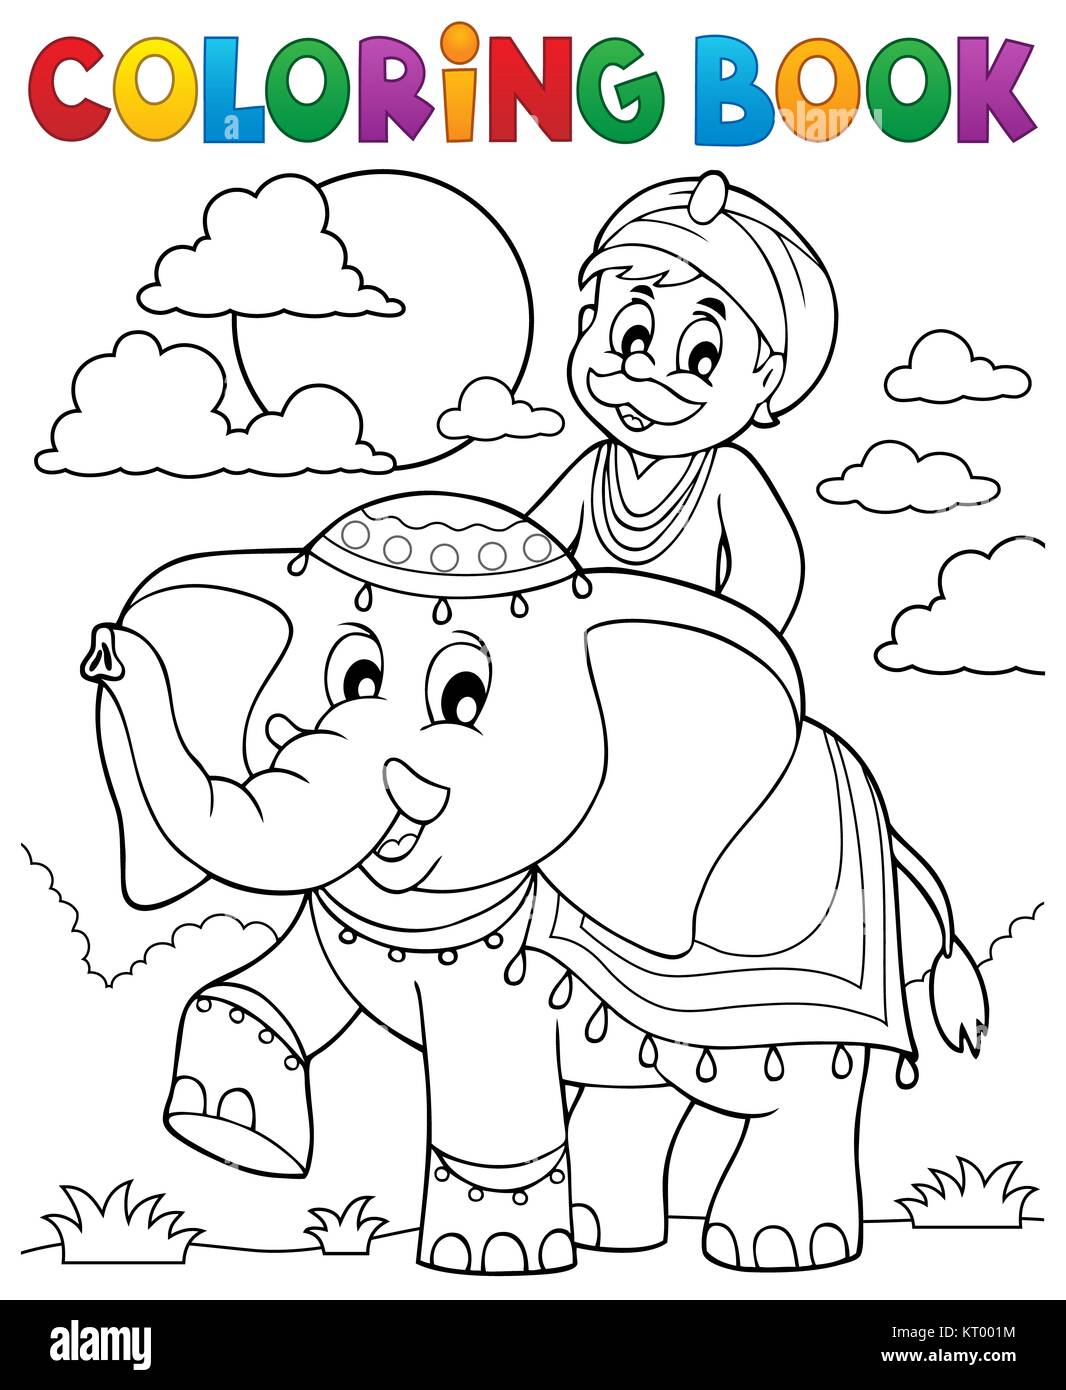 Coloring book man travelling on elephant Stock Photo